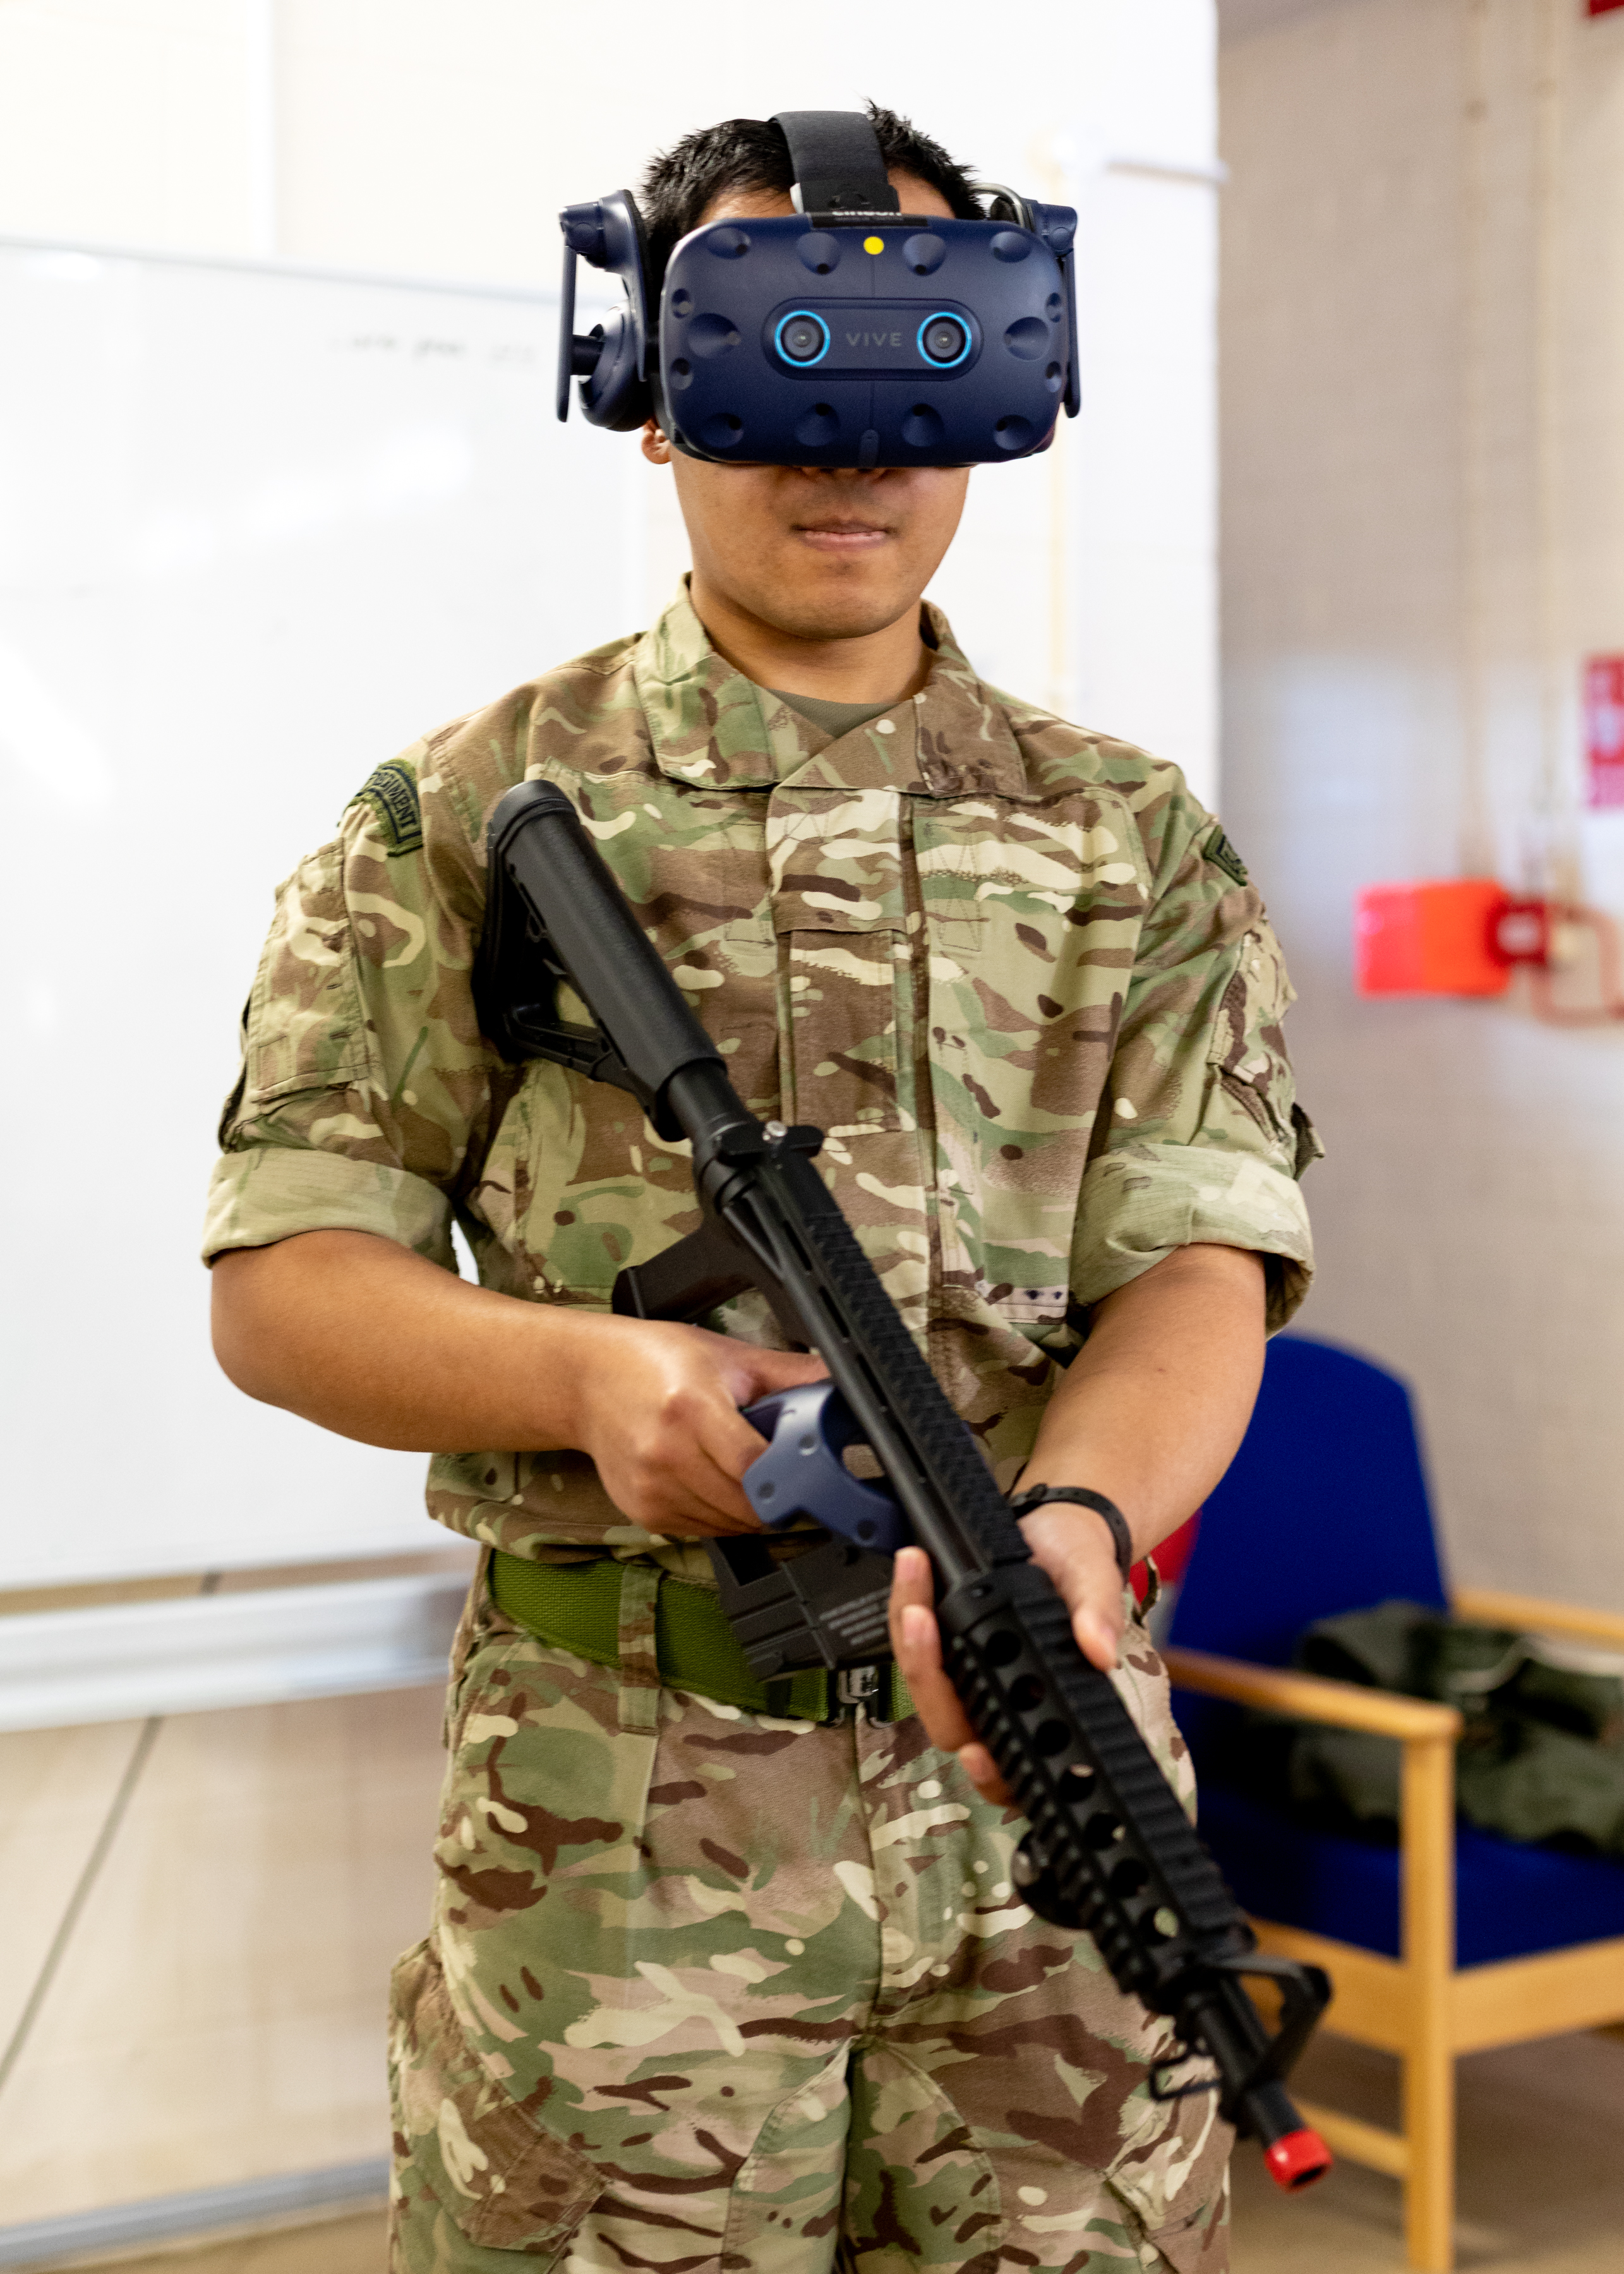 Personnel holds rifle while wearing virtual reality headset.